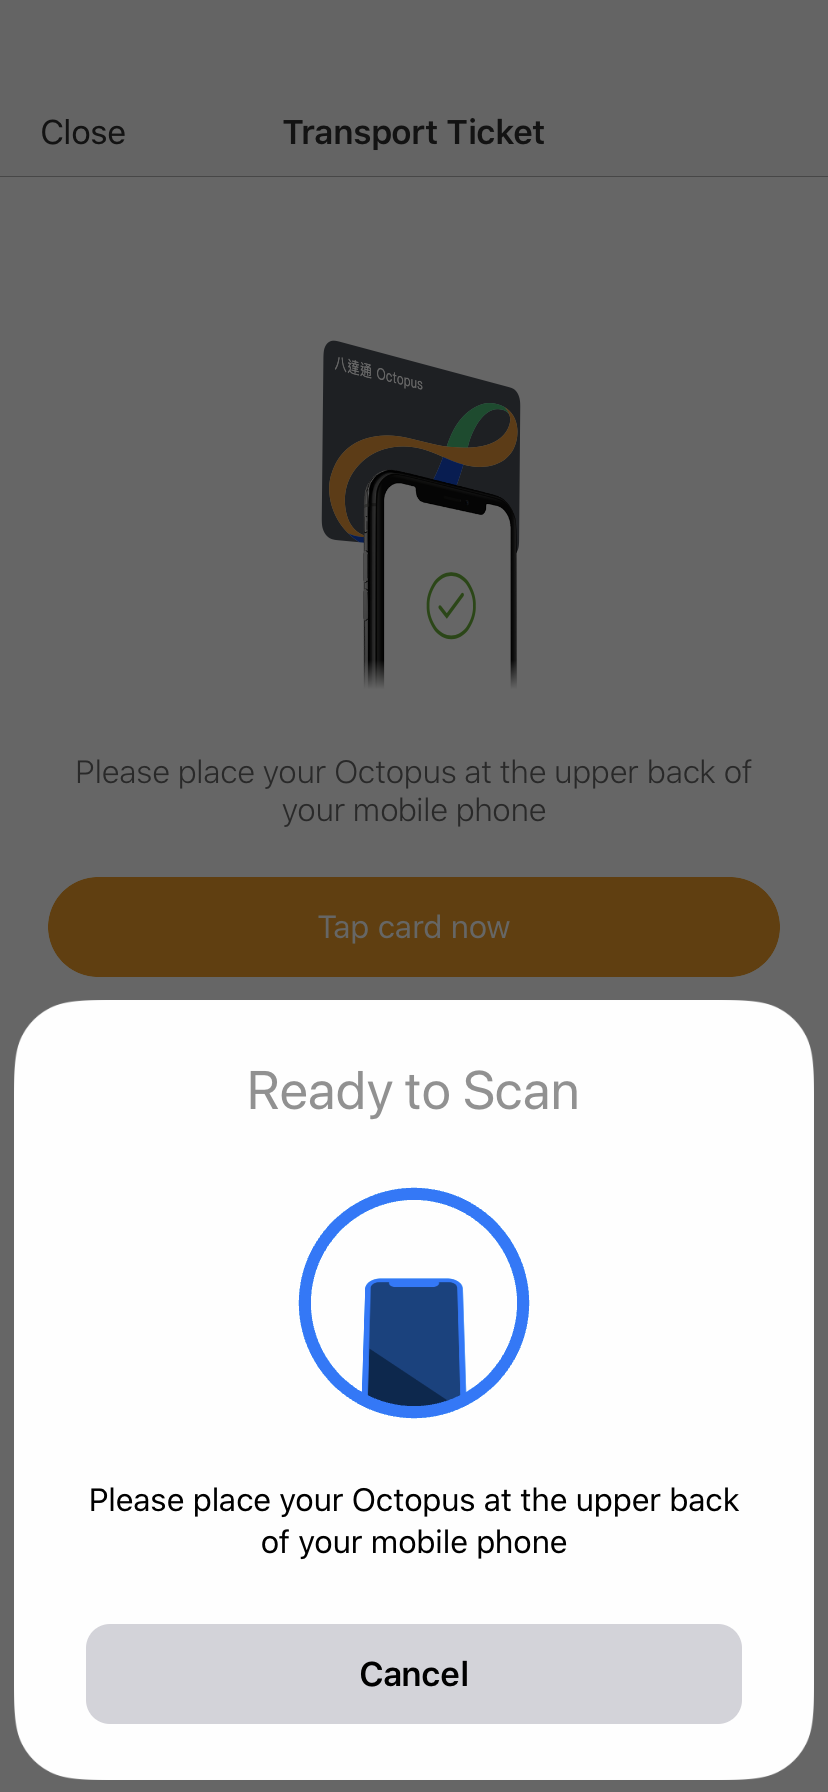 Scan the Octopus